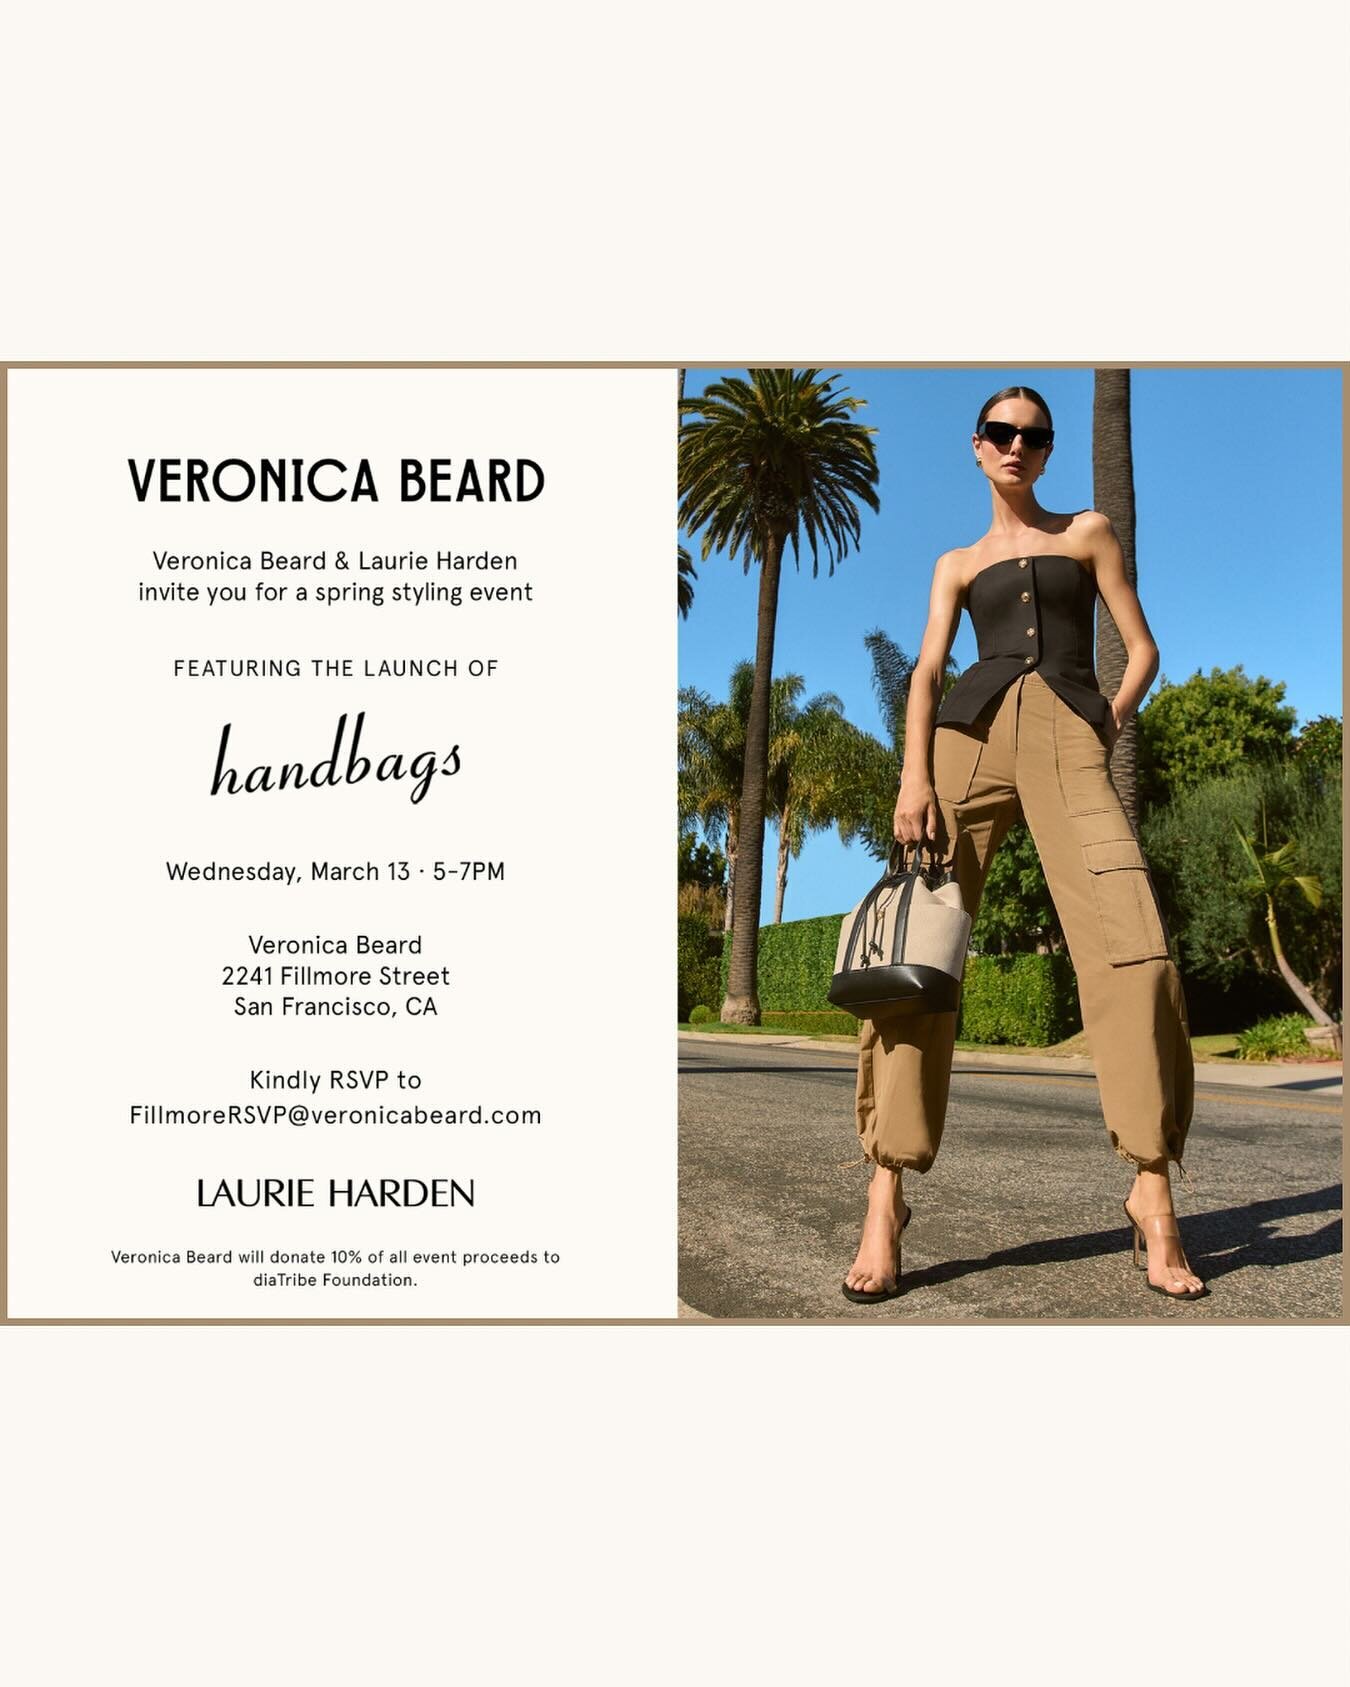 Join me Wed 3/13 from 5-7pm at @veronicabeard SF for a styling event in celebration of their handbag launch!

10% of all proceeds will go to diaTribe Foundation 🤍